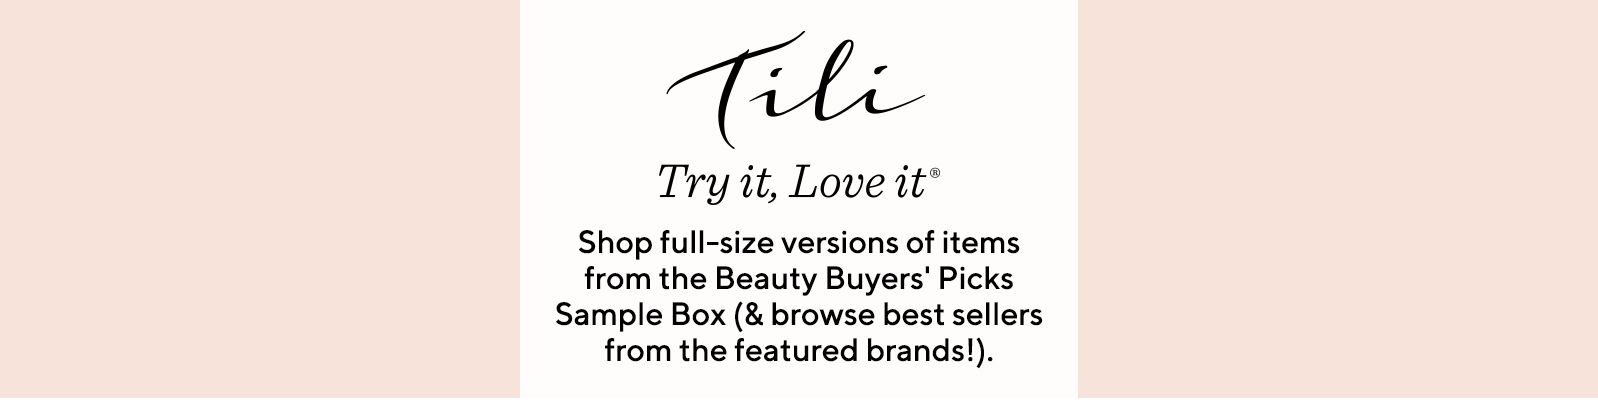 TILI Try it, Love it®  Shop full-size versions of items from the Beauty Buyers' Picks Sample Box (& browse best sellers from the featured brands!).